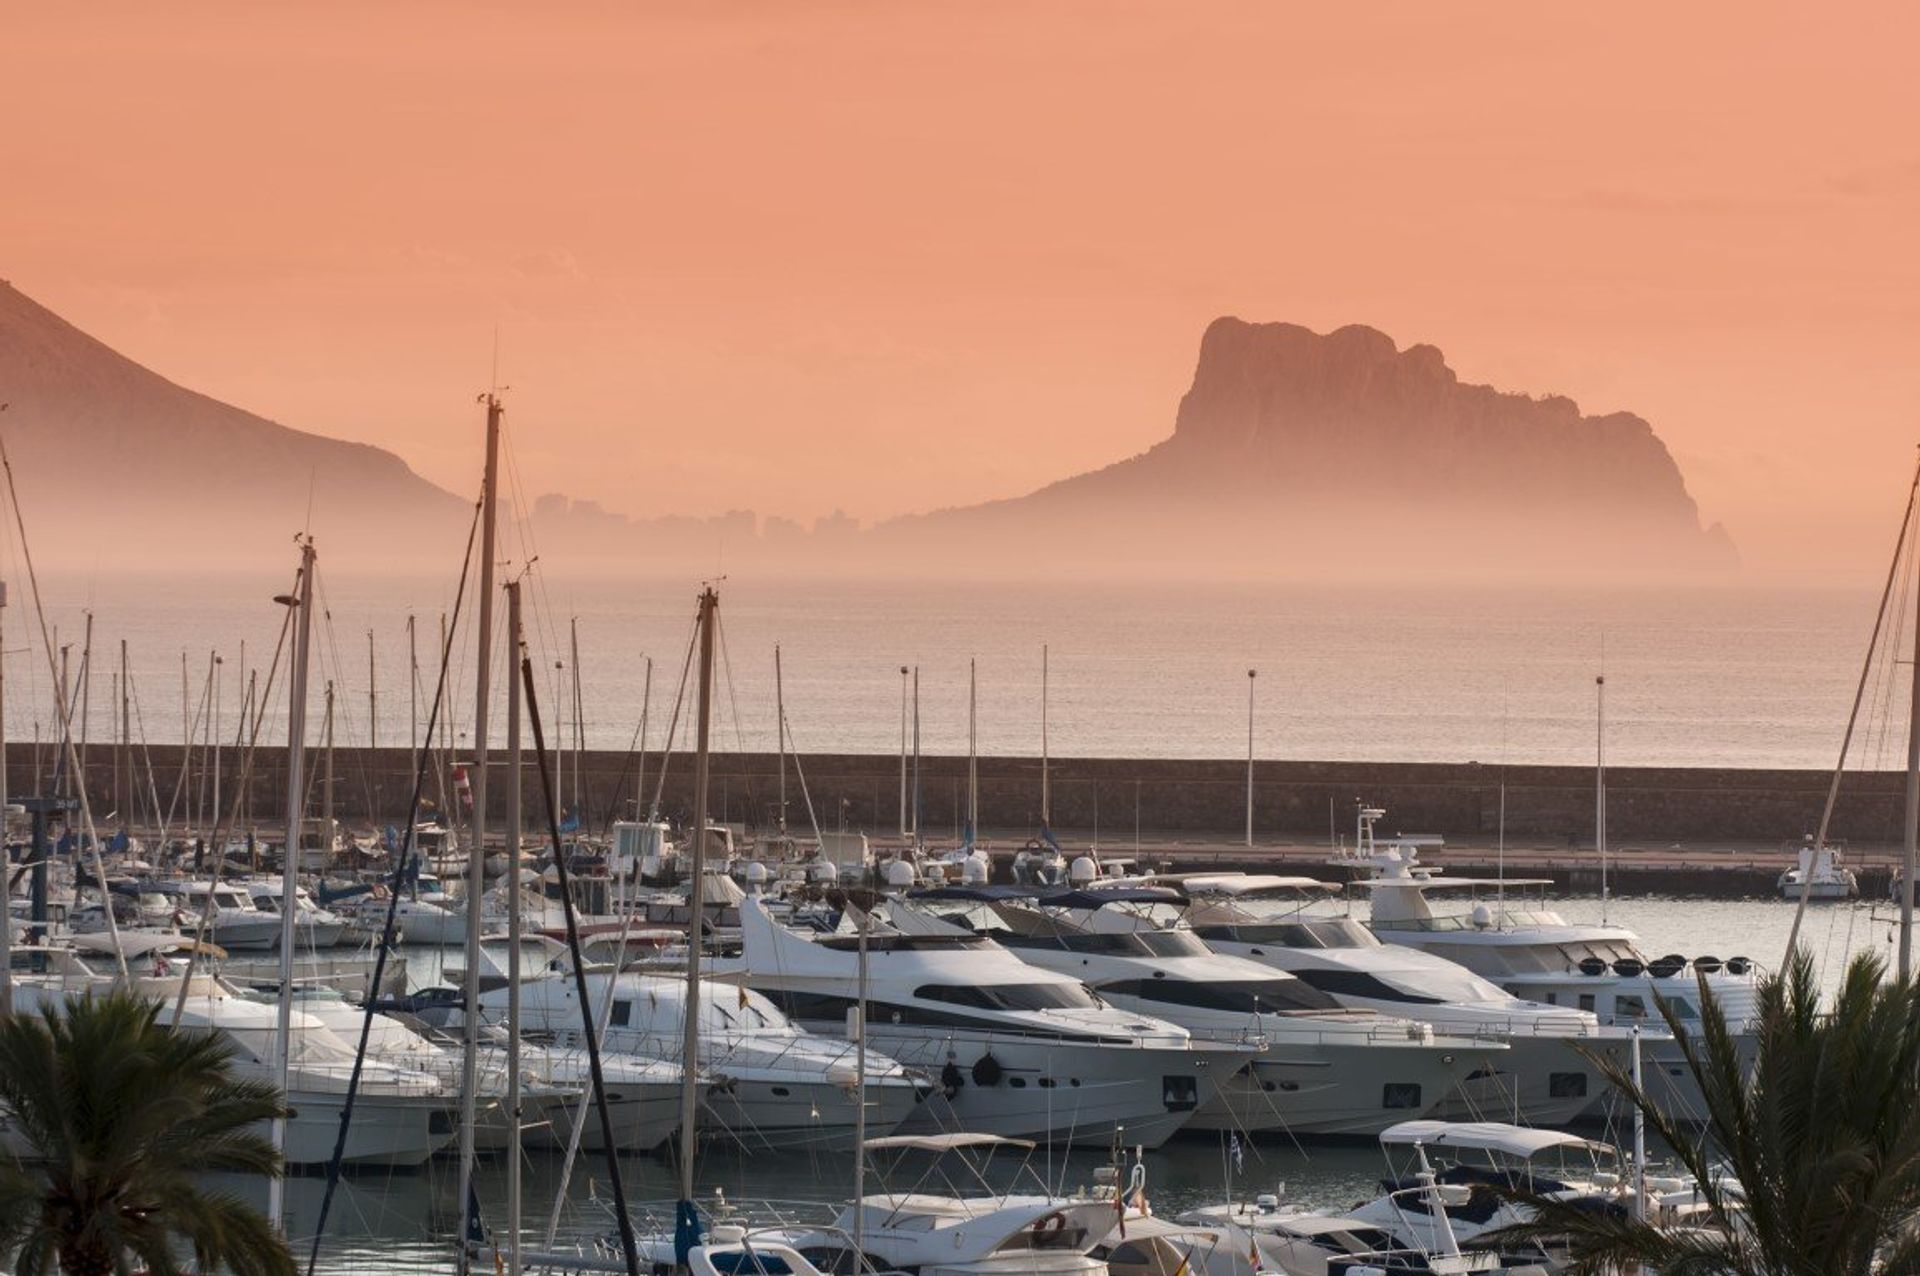 Take a sunset stroll down the marina and watch the luxury yachts set against a backdrop of mountains